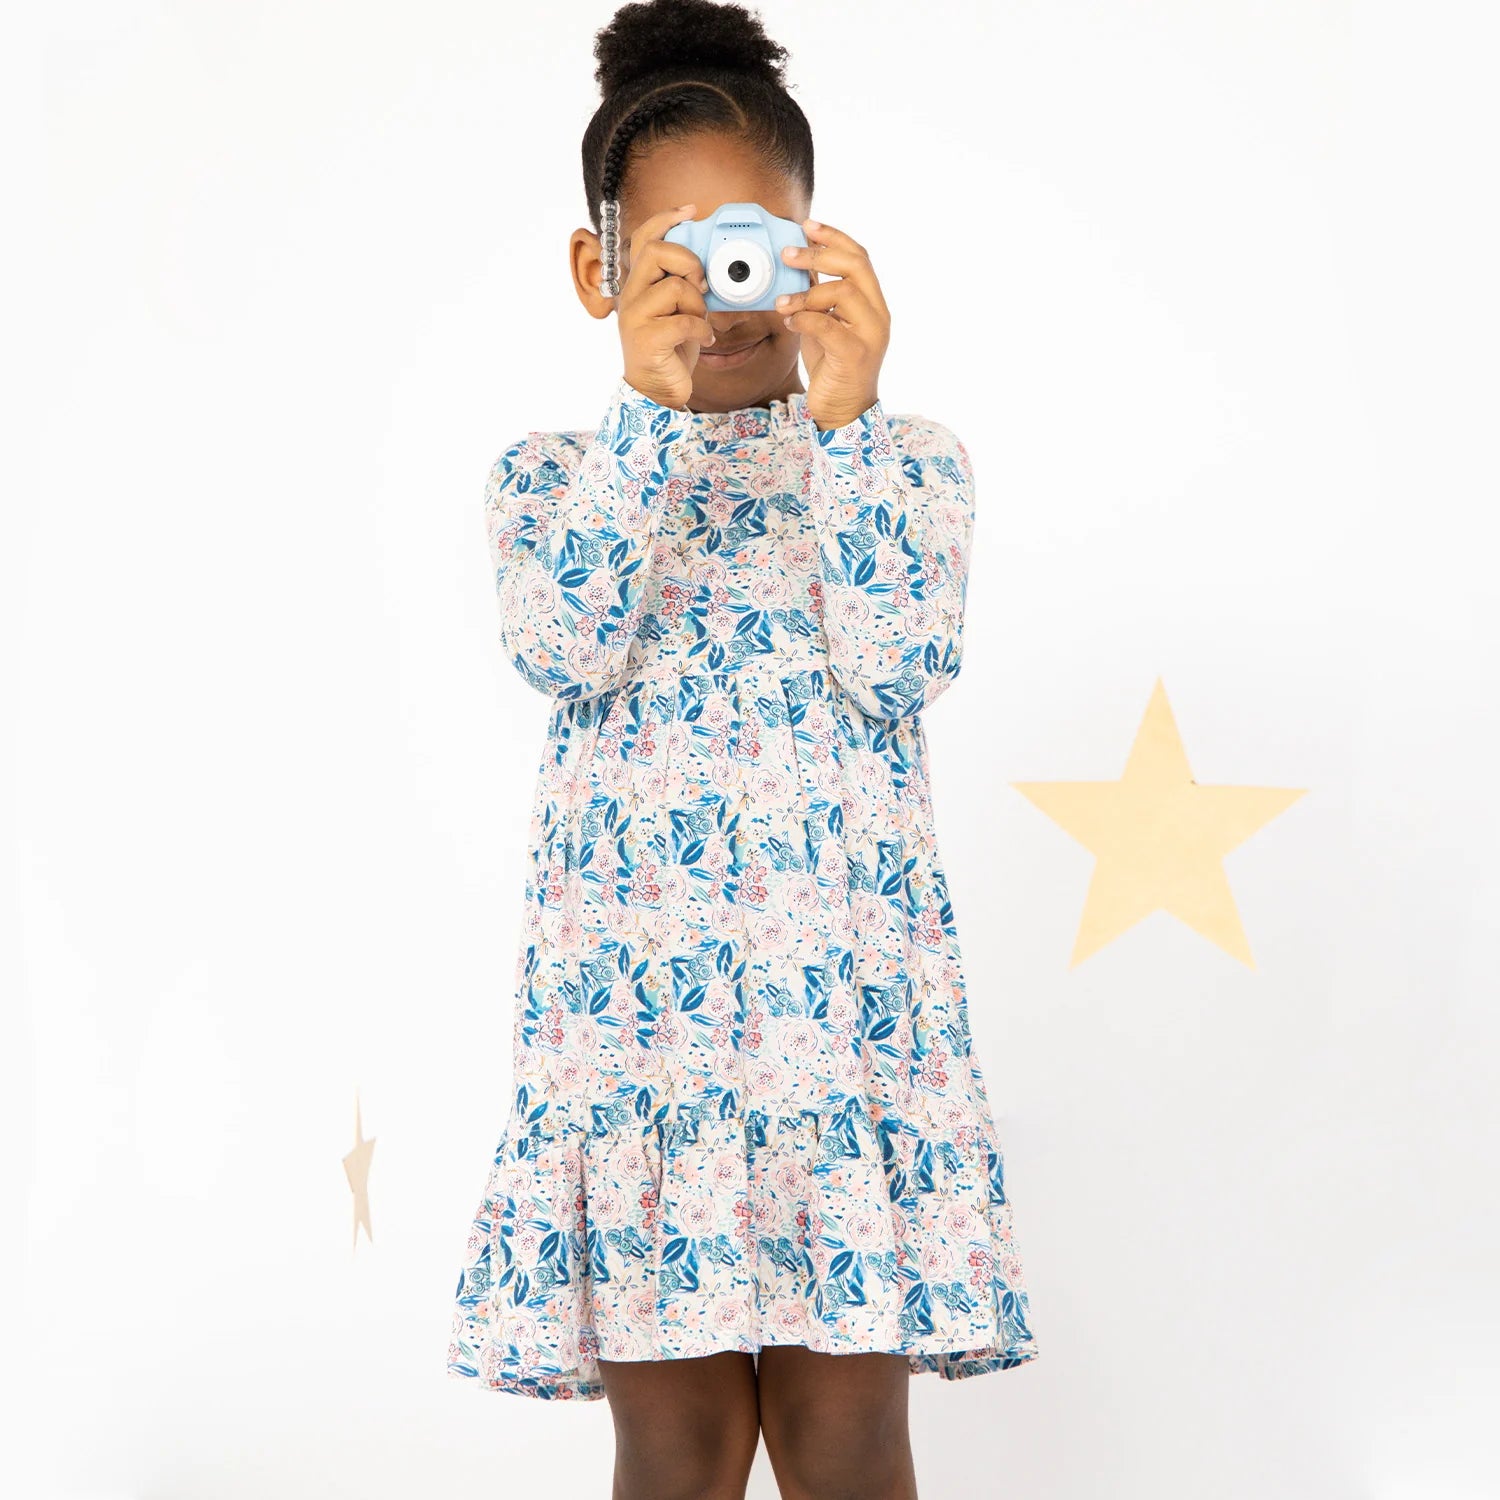 Once and Floral Toddler Dress